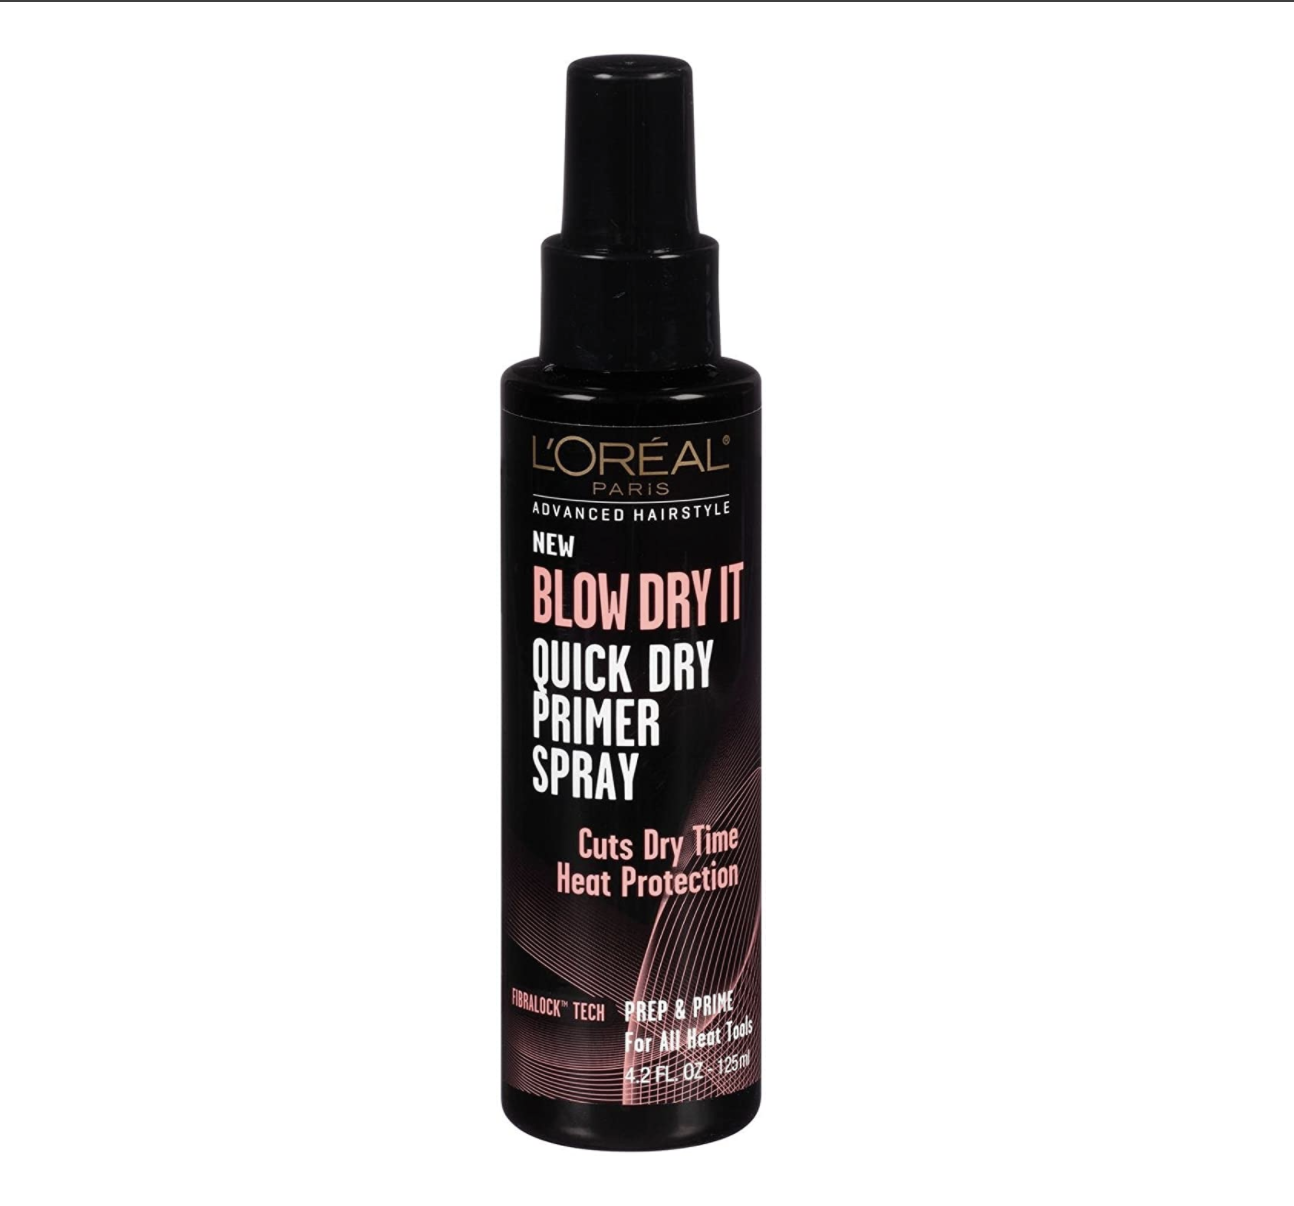 Advanced Hairstyle BLOW DRY IT Quick Dry Primer Spray